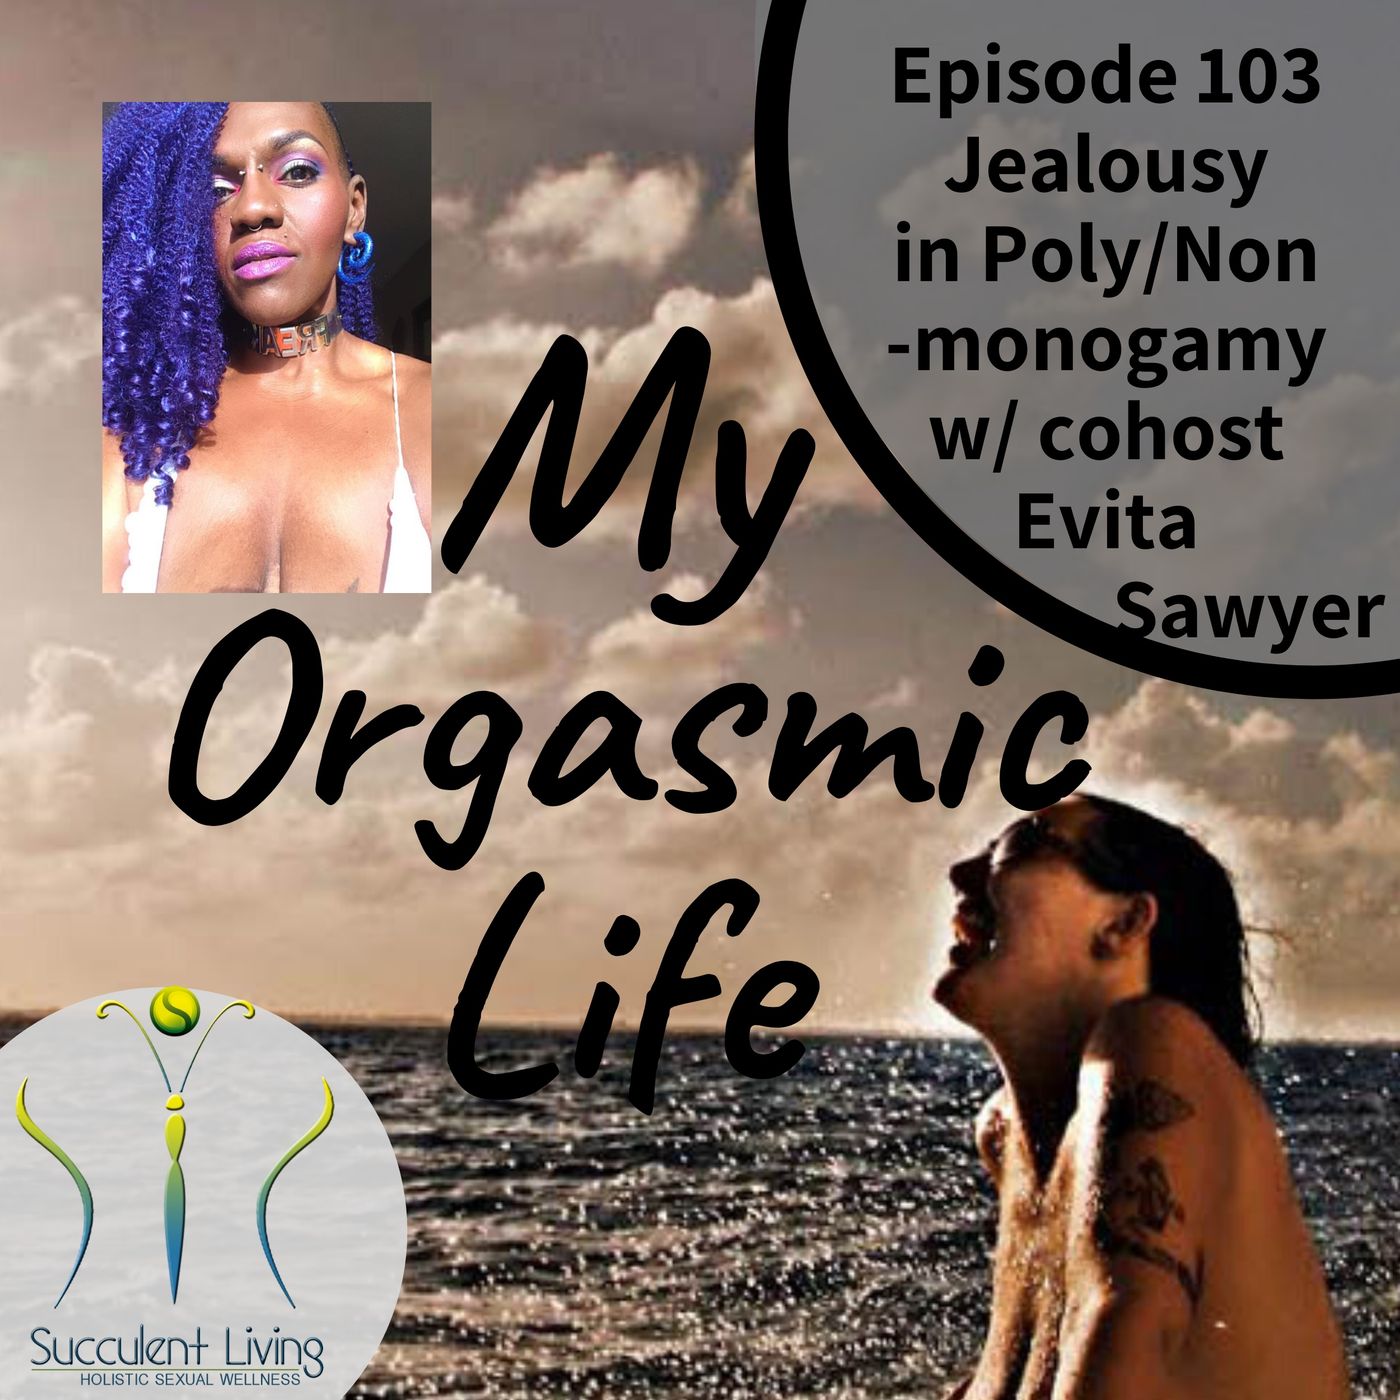 My Orgasmic Life - Jealousy in Poly, Ethical Non-Monogamy relationships with co-host Evita Sawyer- EP.103